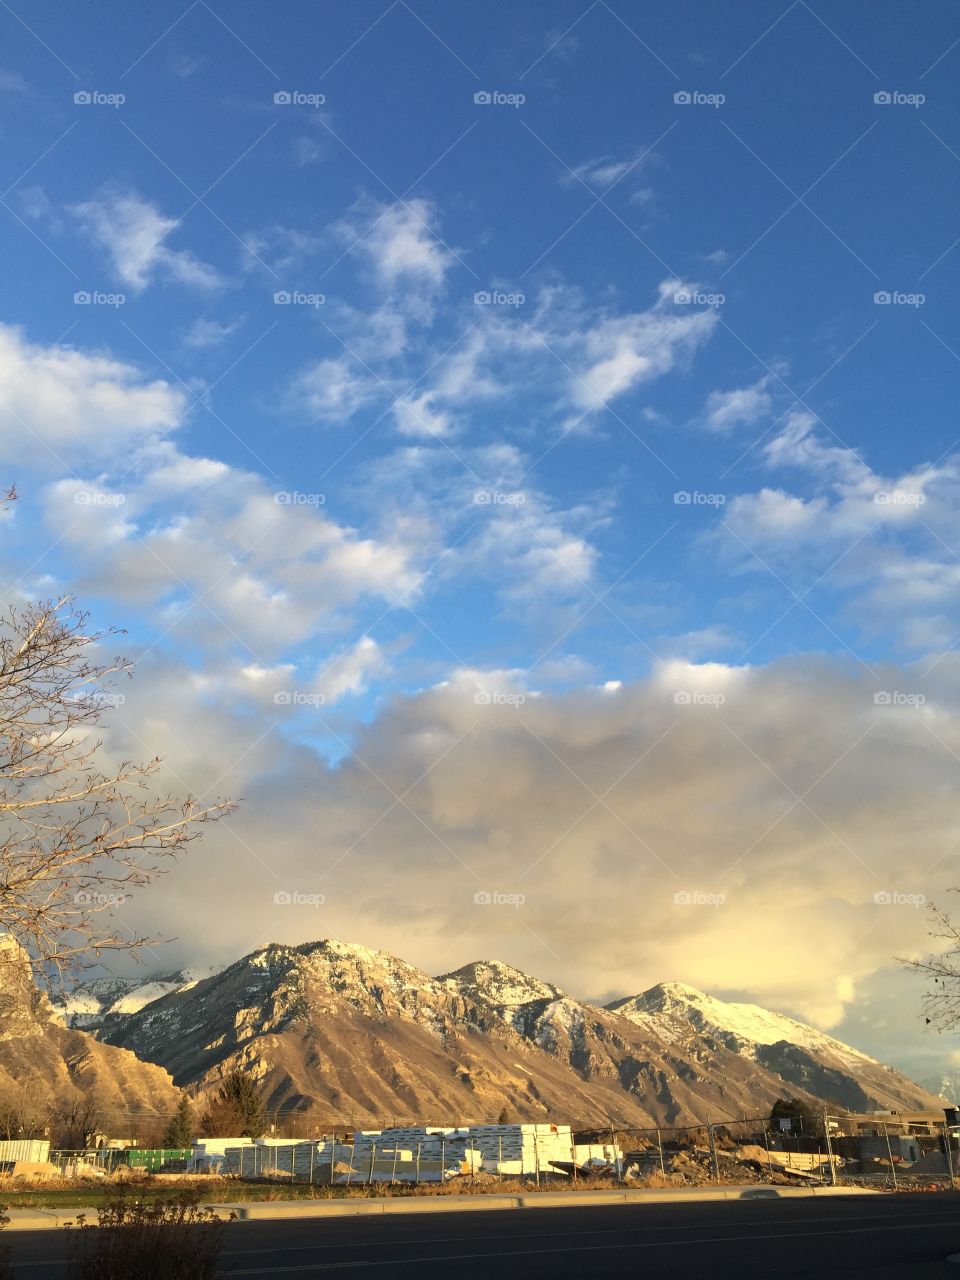 Provo Gold. Another sunset in Utah County